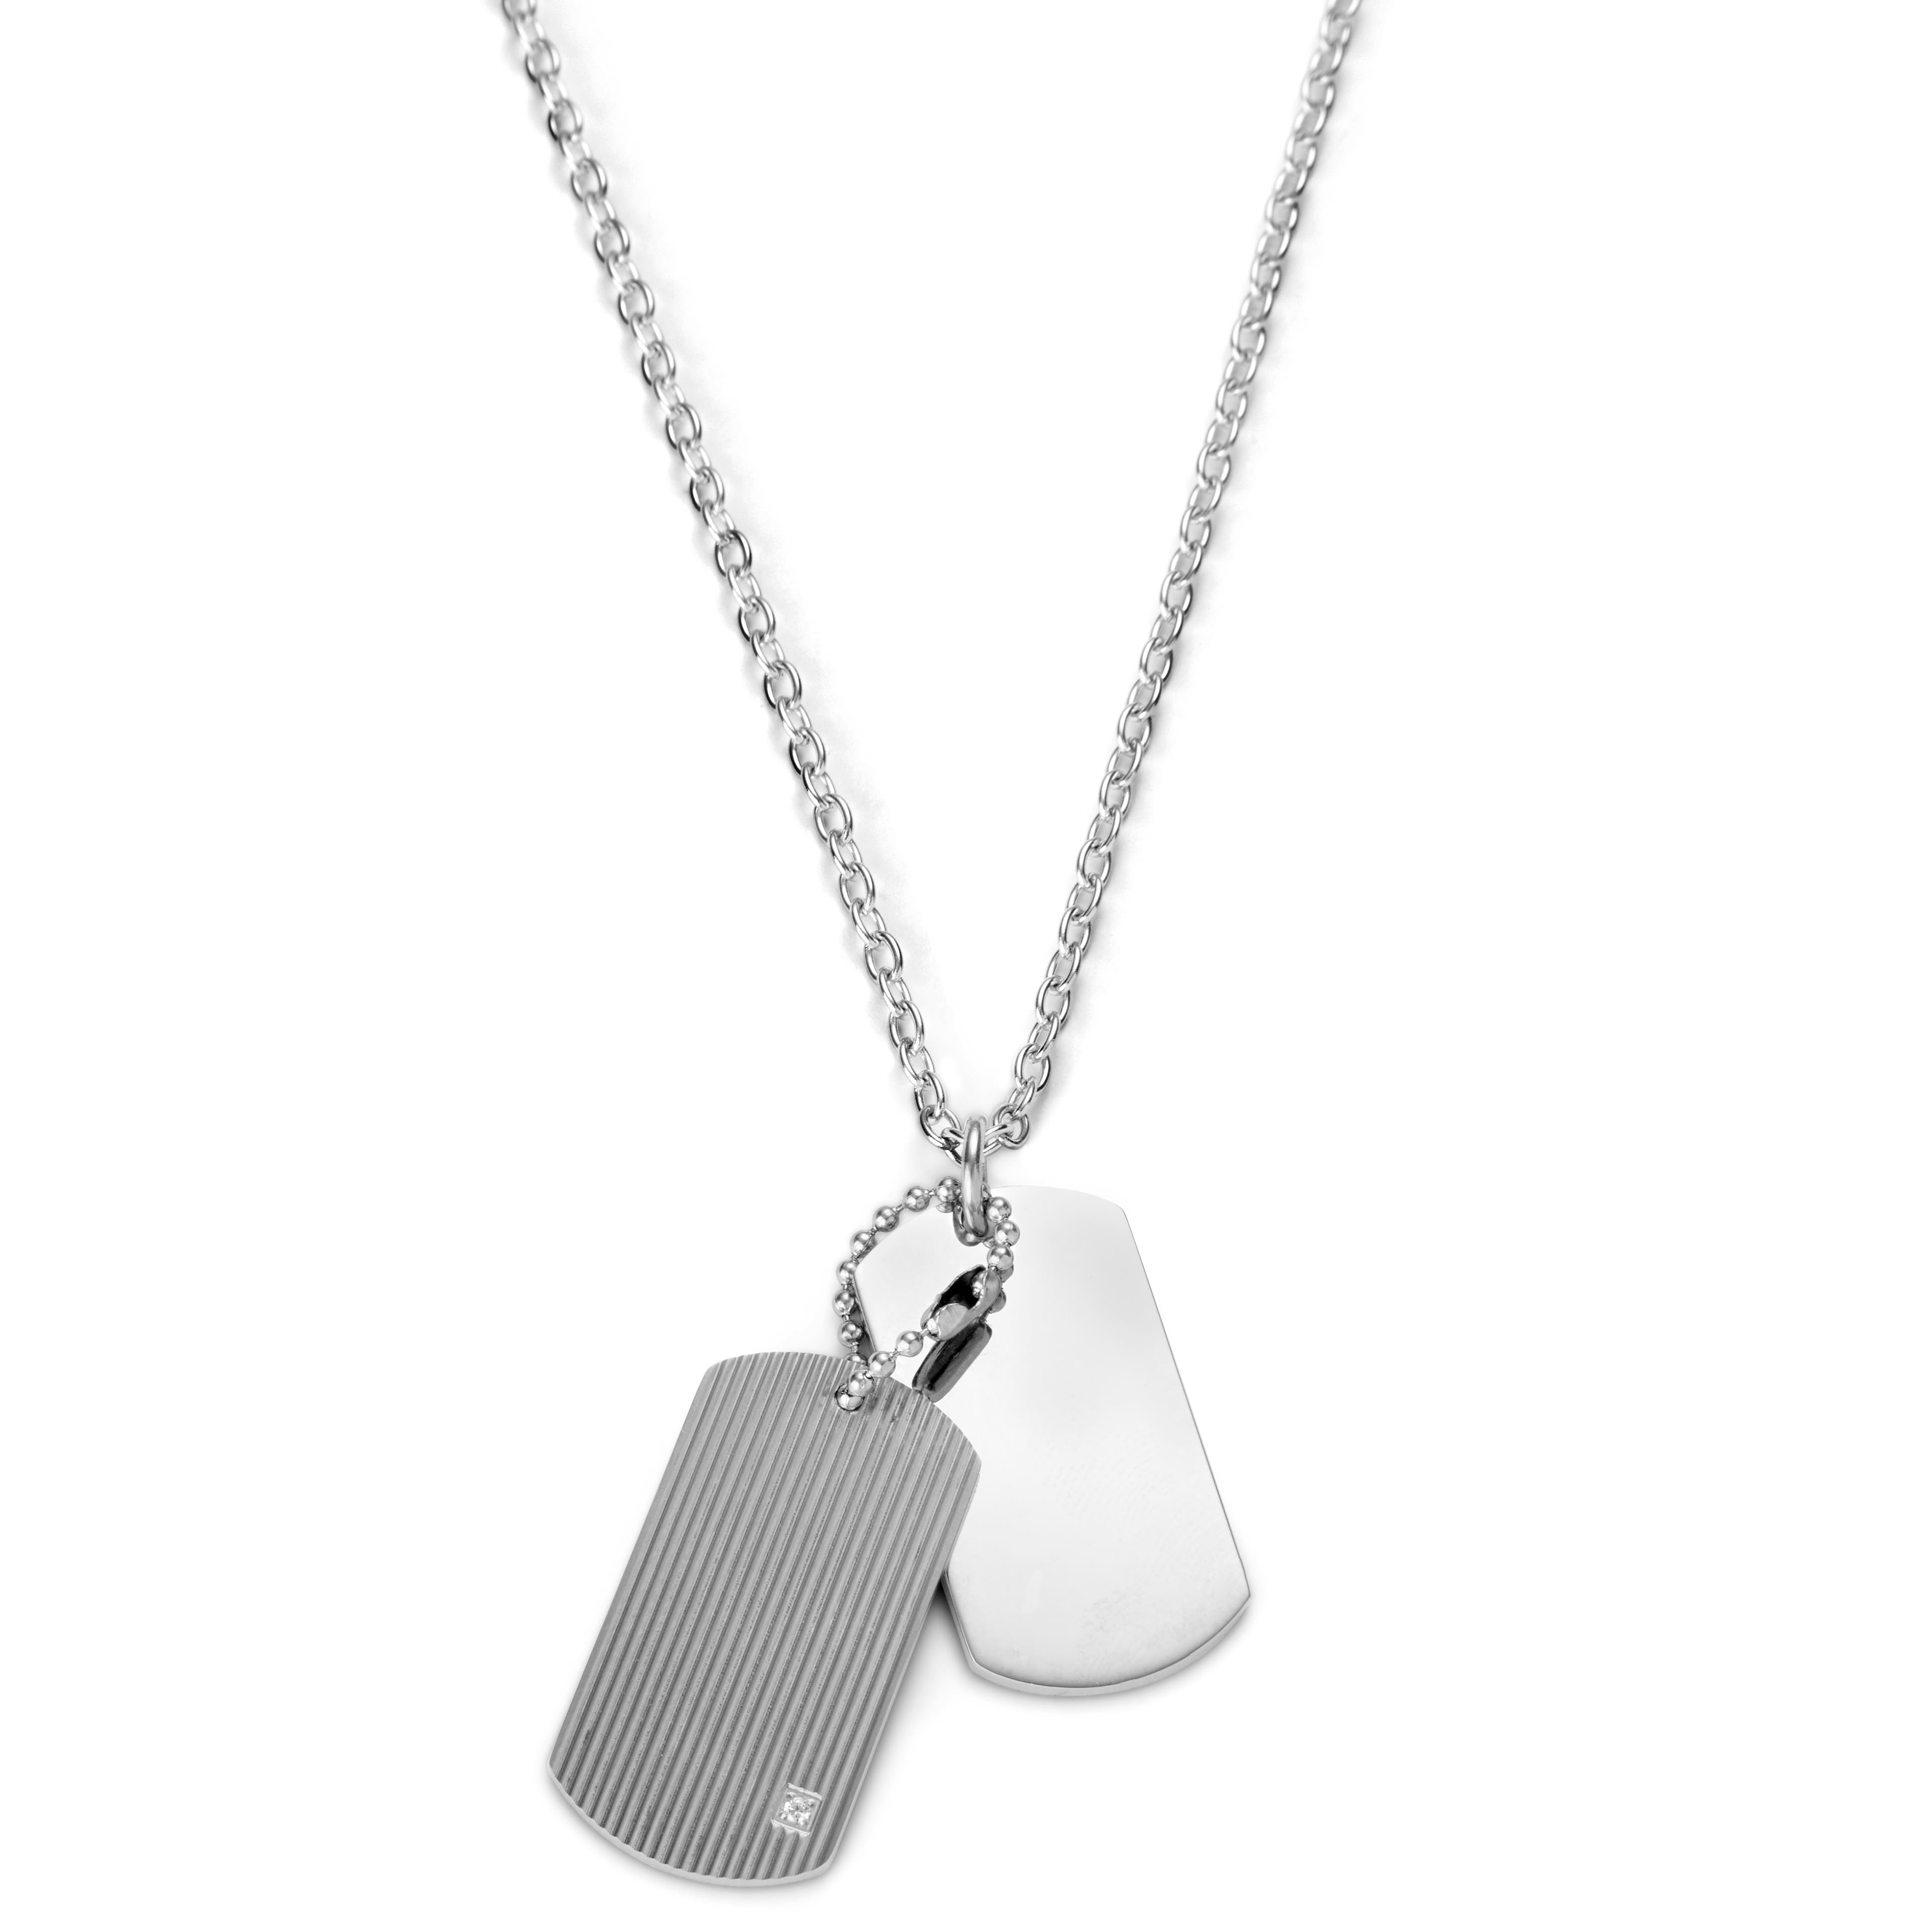 Silver-Tone Textured Dog Tag Necklace